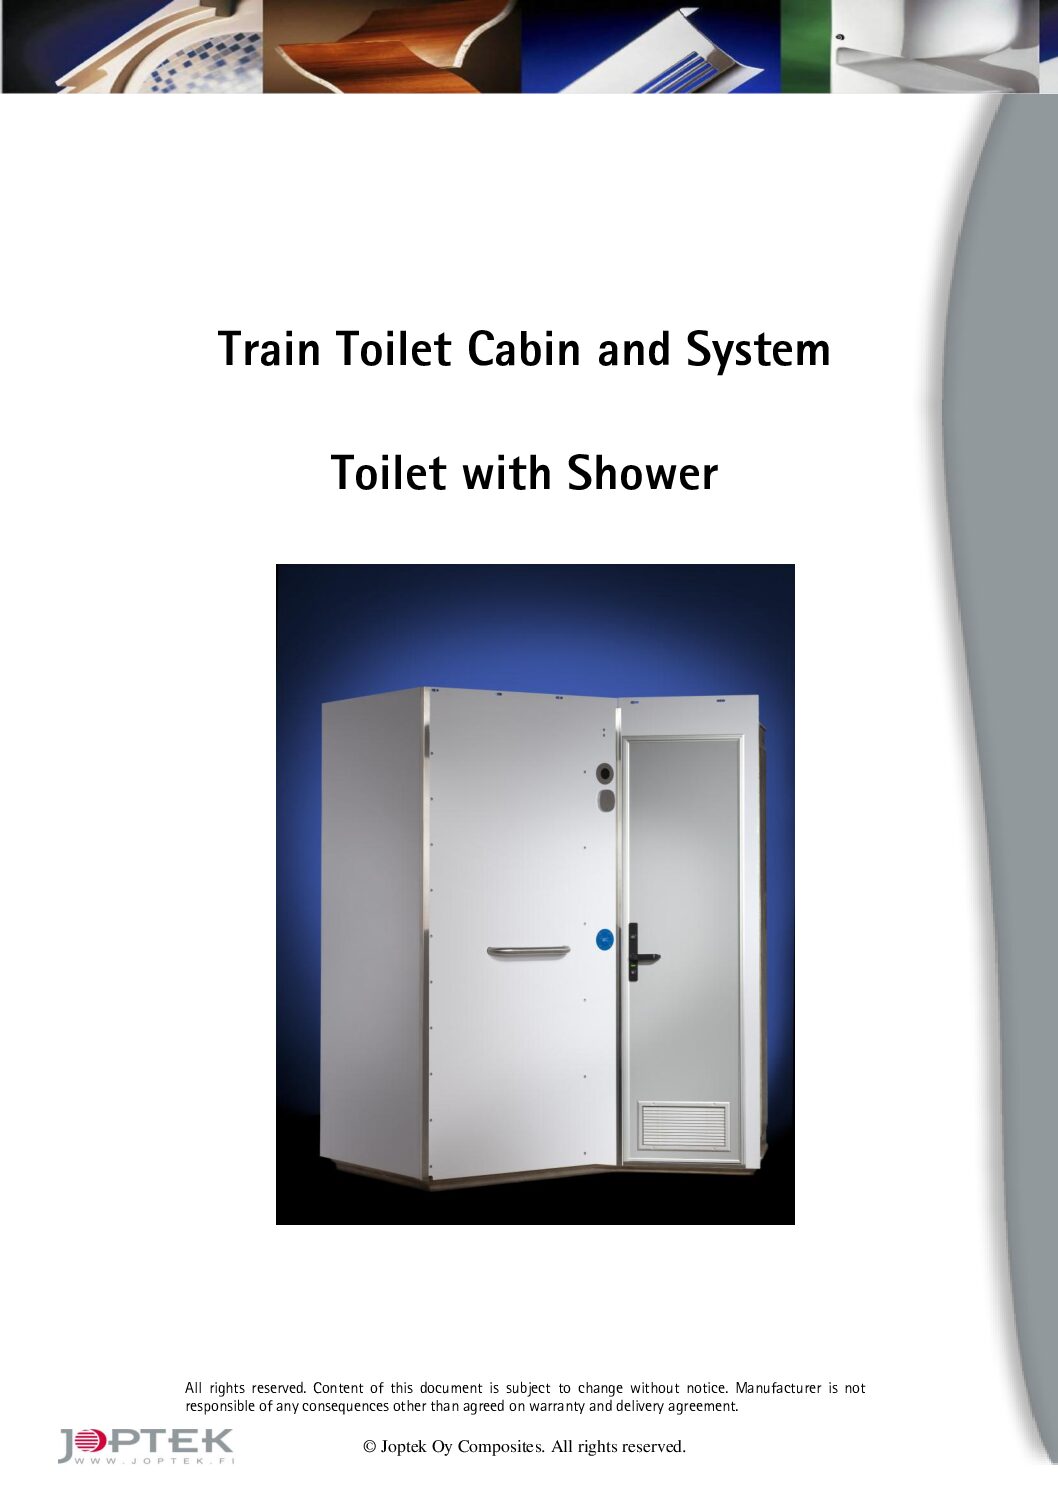 Train Toilet with Shower